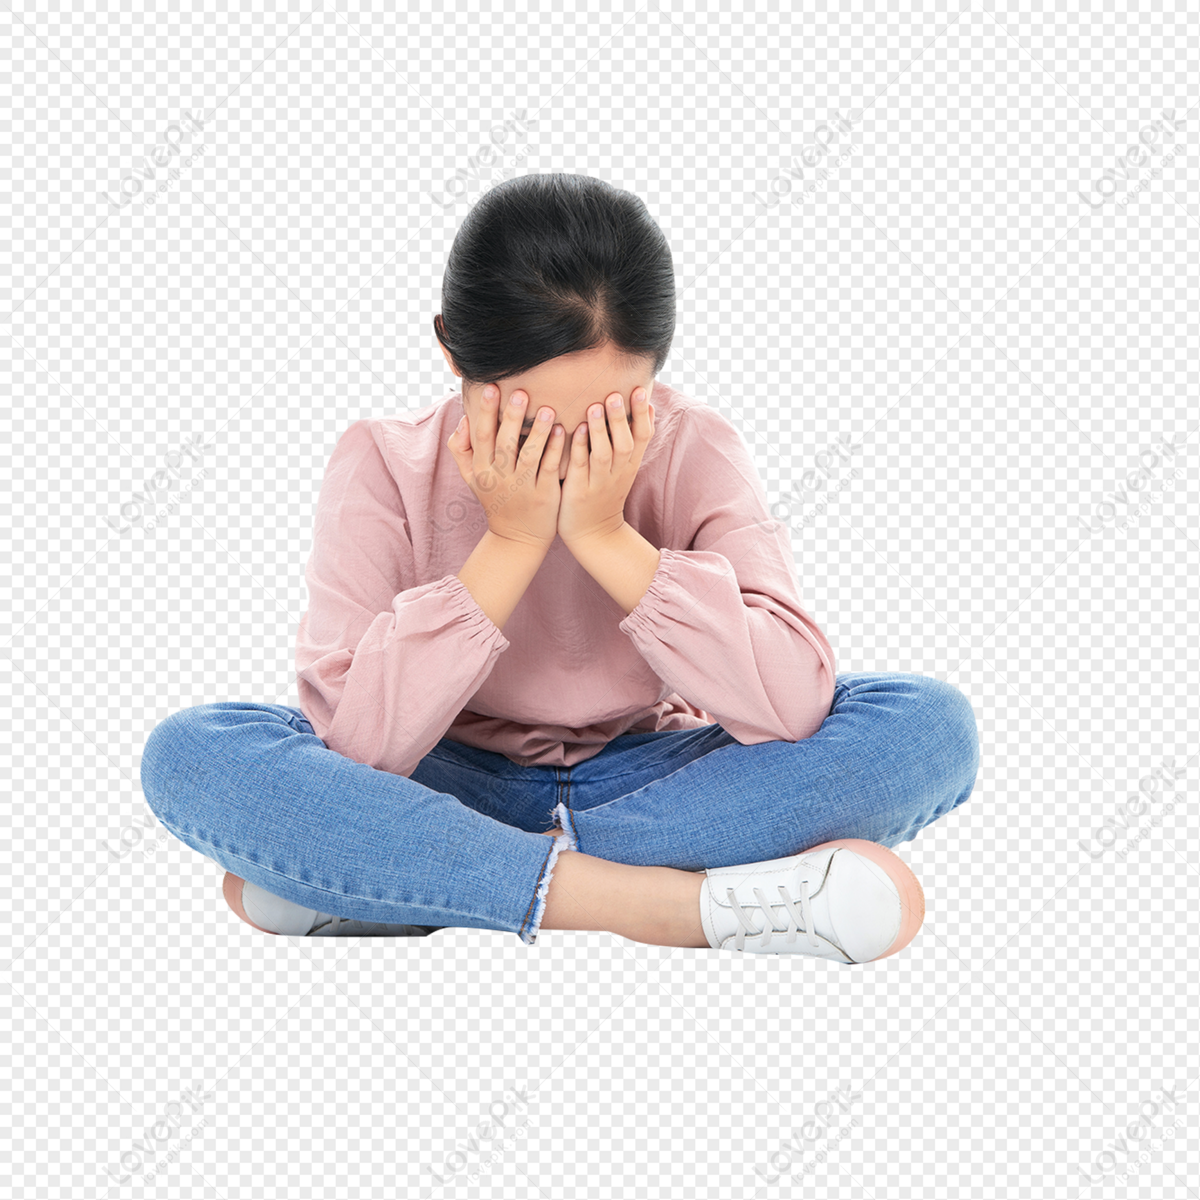 Sad Girl Sitting On The Ground PNG Transparent Background And ...